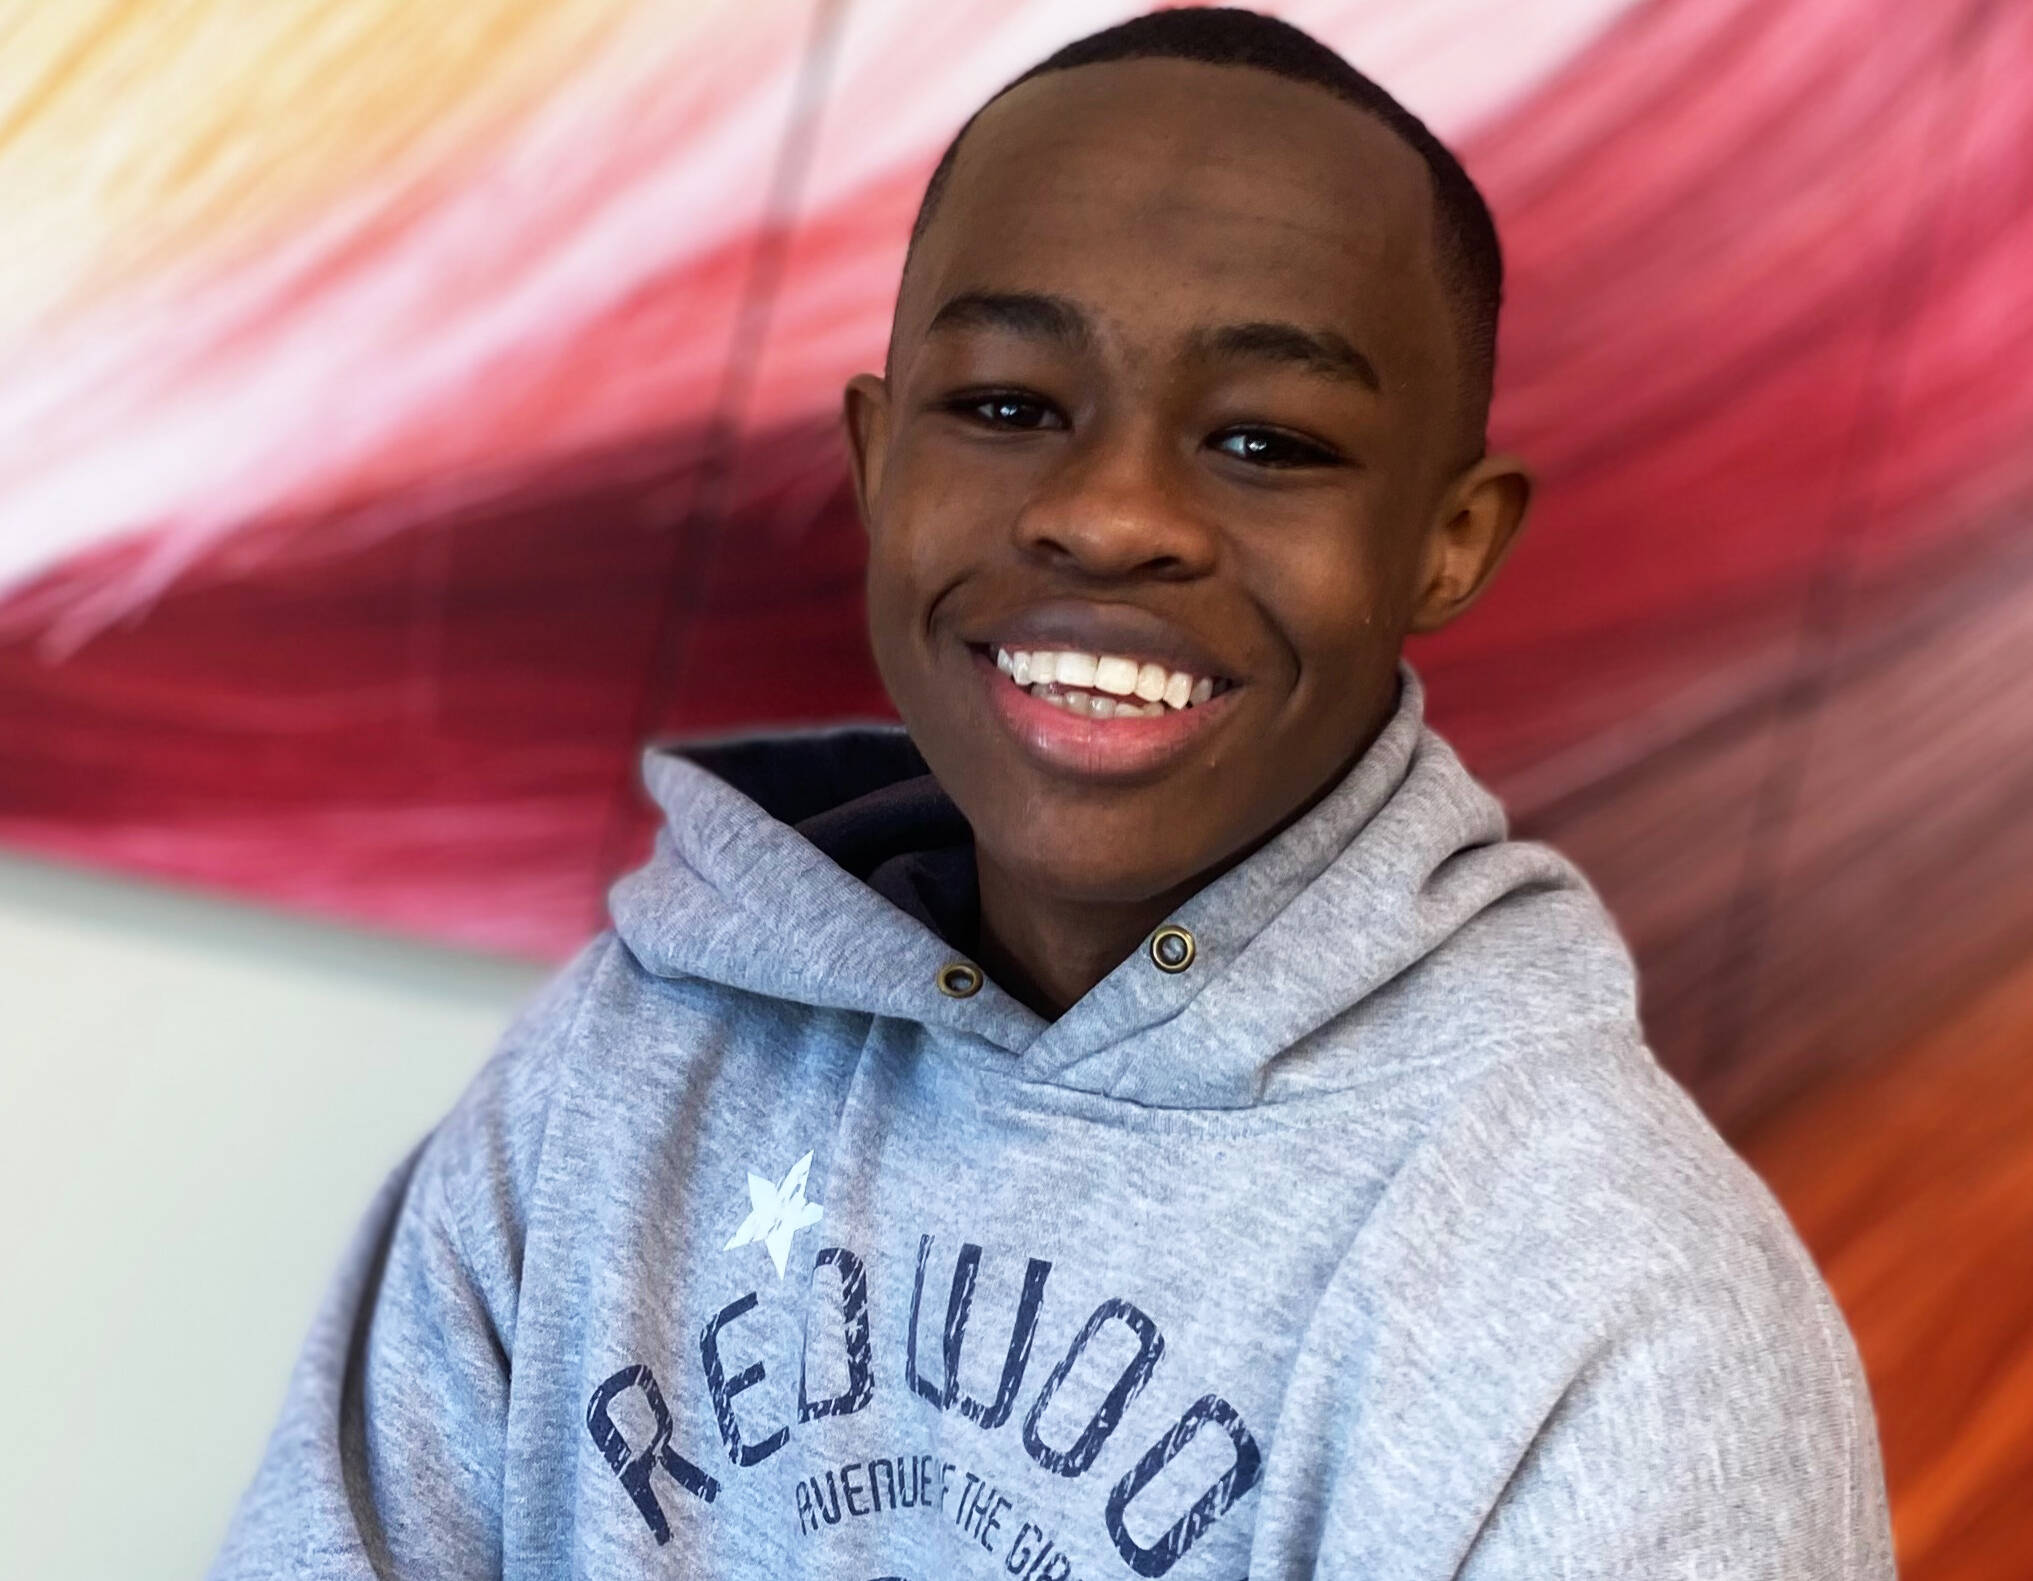 Timothy Mwangi, 18, died from injuries suffered in an Aug. 28 vehicle collision in Kent. COURTESY PHOTO, GoFundMe.com